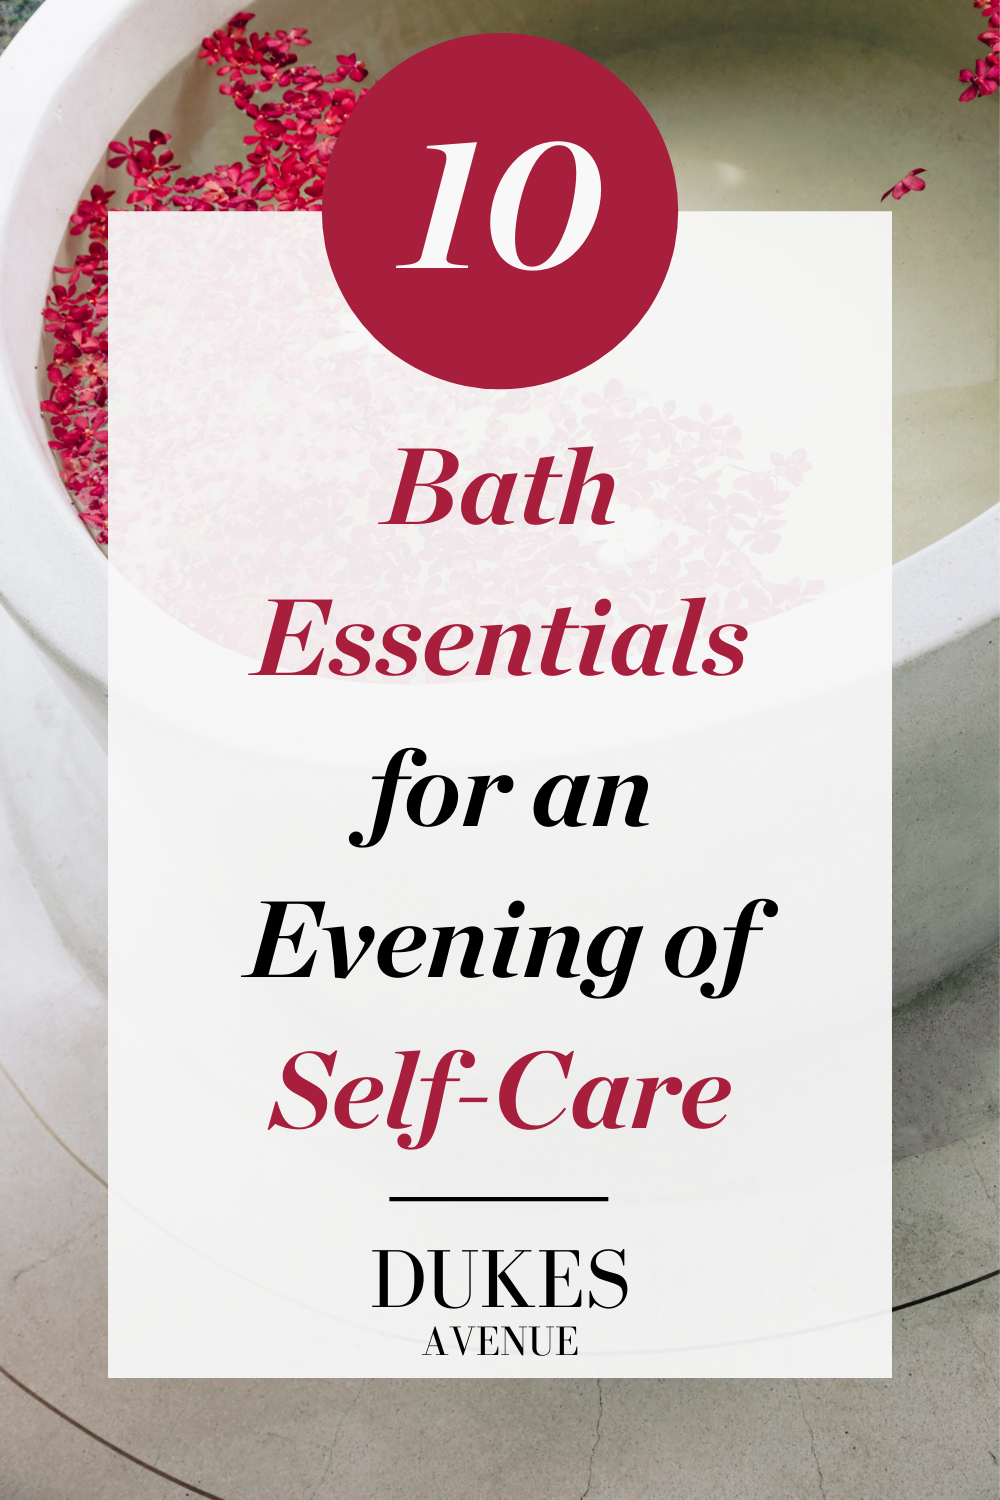 Bath with pink petals with text overlay of '10 Bath Essentials for an Evening of Self-Care'